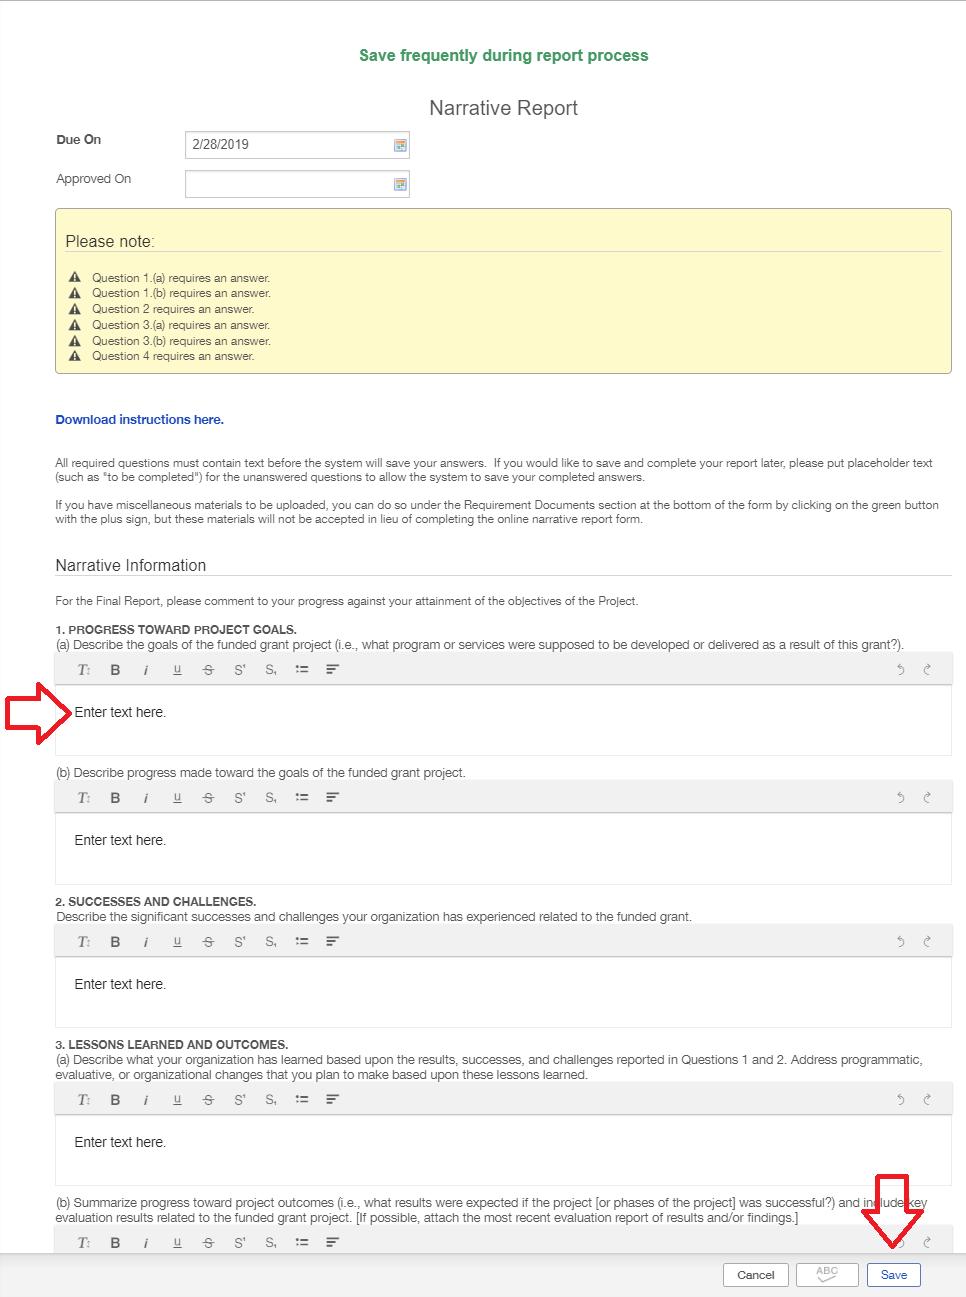 You can either type directly into those boxes or copy and paste text into them from another source. The yellow box will clarify which questions on this form require a response.